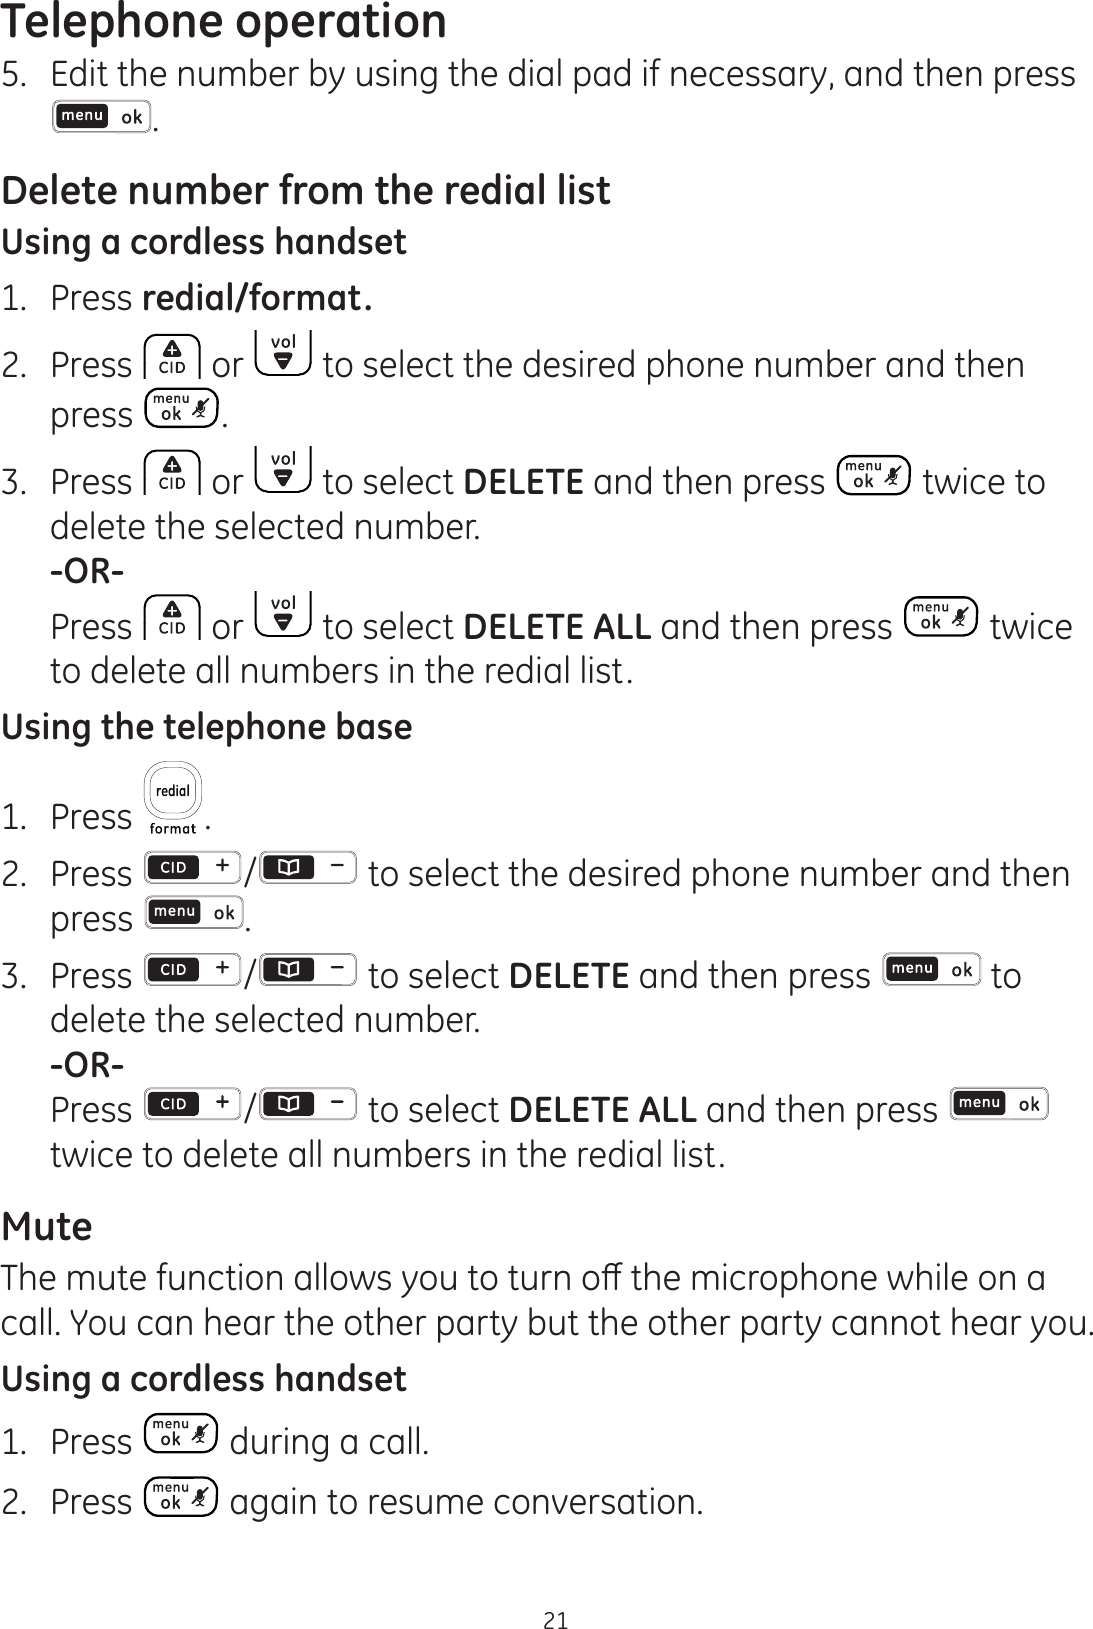 Telephone operation215.  Edit the number by using the dial pad if necessary, and then press .Delete number from the redial listUsing a cordless handset1.  Press redial/format.2.  Press   or   to select the desired phone number and then press  .3.  Press   or   to select DELETE and then press   twice to delete the selected number. -OR-  Press   or   to select DELETE ALL and then press   twice to delete all numbers in the redial list.Using the telephone base1.  Press  .2. Press  /  to select the desired phone number and then press  .3.  Press  / to select DELETE and then press   to delete the selected number.   -OR- Press / to select DELETE ALL and then press   twice to delete all numbers in the redial list.Mute7KHPXWHIXQFWLRQDOORZV\RXWRWXUQRȺWKHPLFURSKRQHZKLOHRQDcall. You can hear the other party but the other party cannot hear you.Using a cordless handset1.  Press   during a call.2.  Press   again to resume conversation.